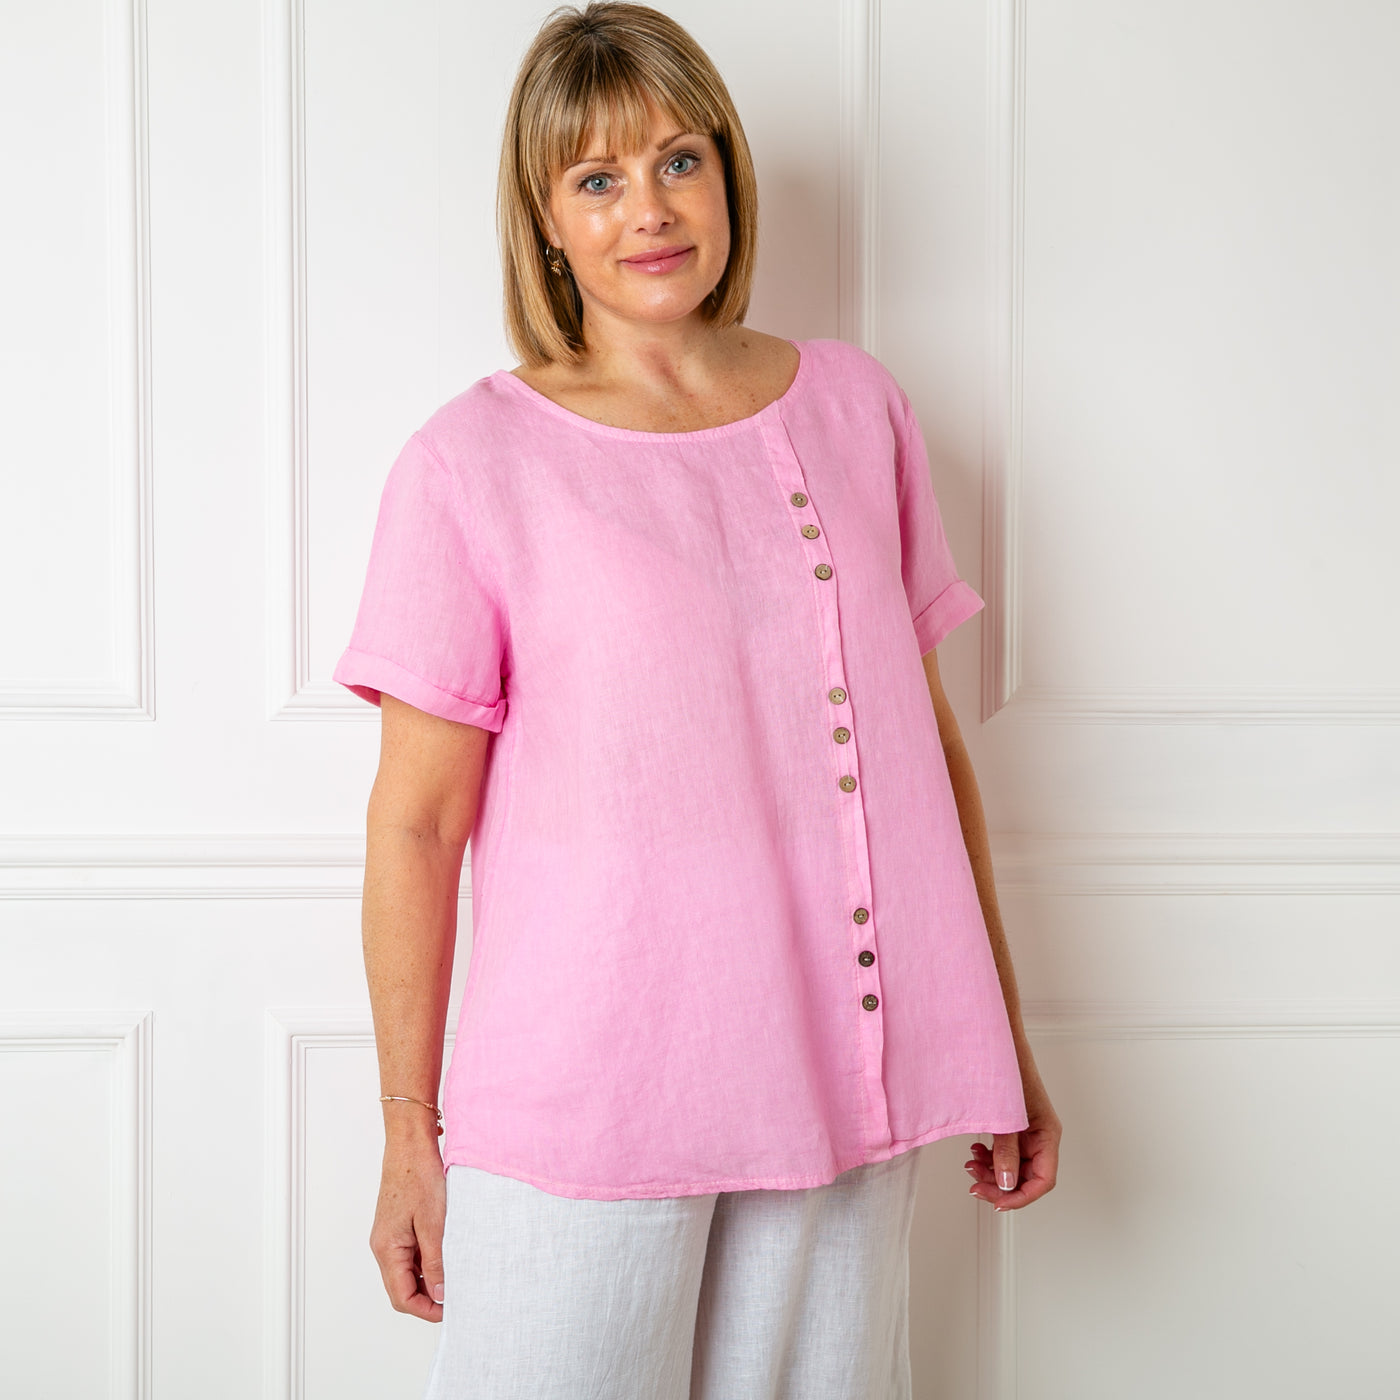 The pink Button Down Linen Top with short sleeves and a round neckline